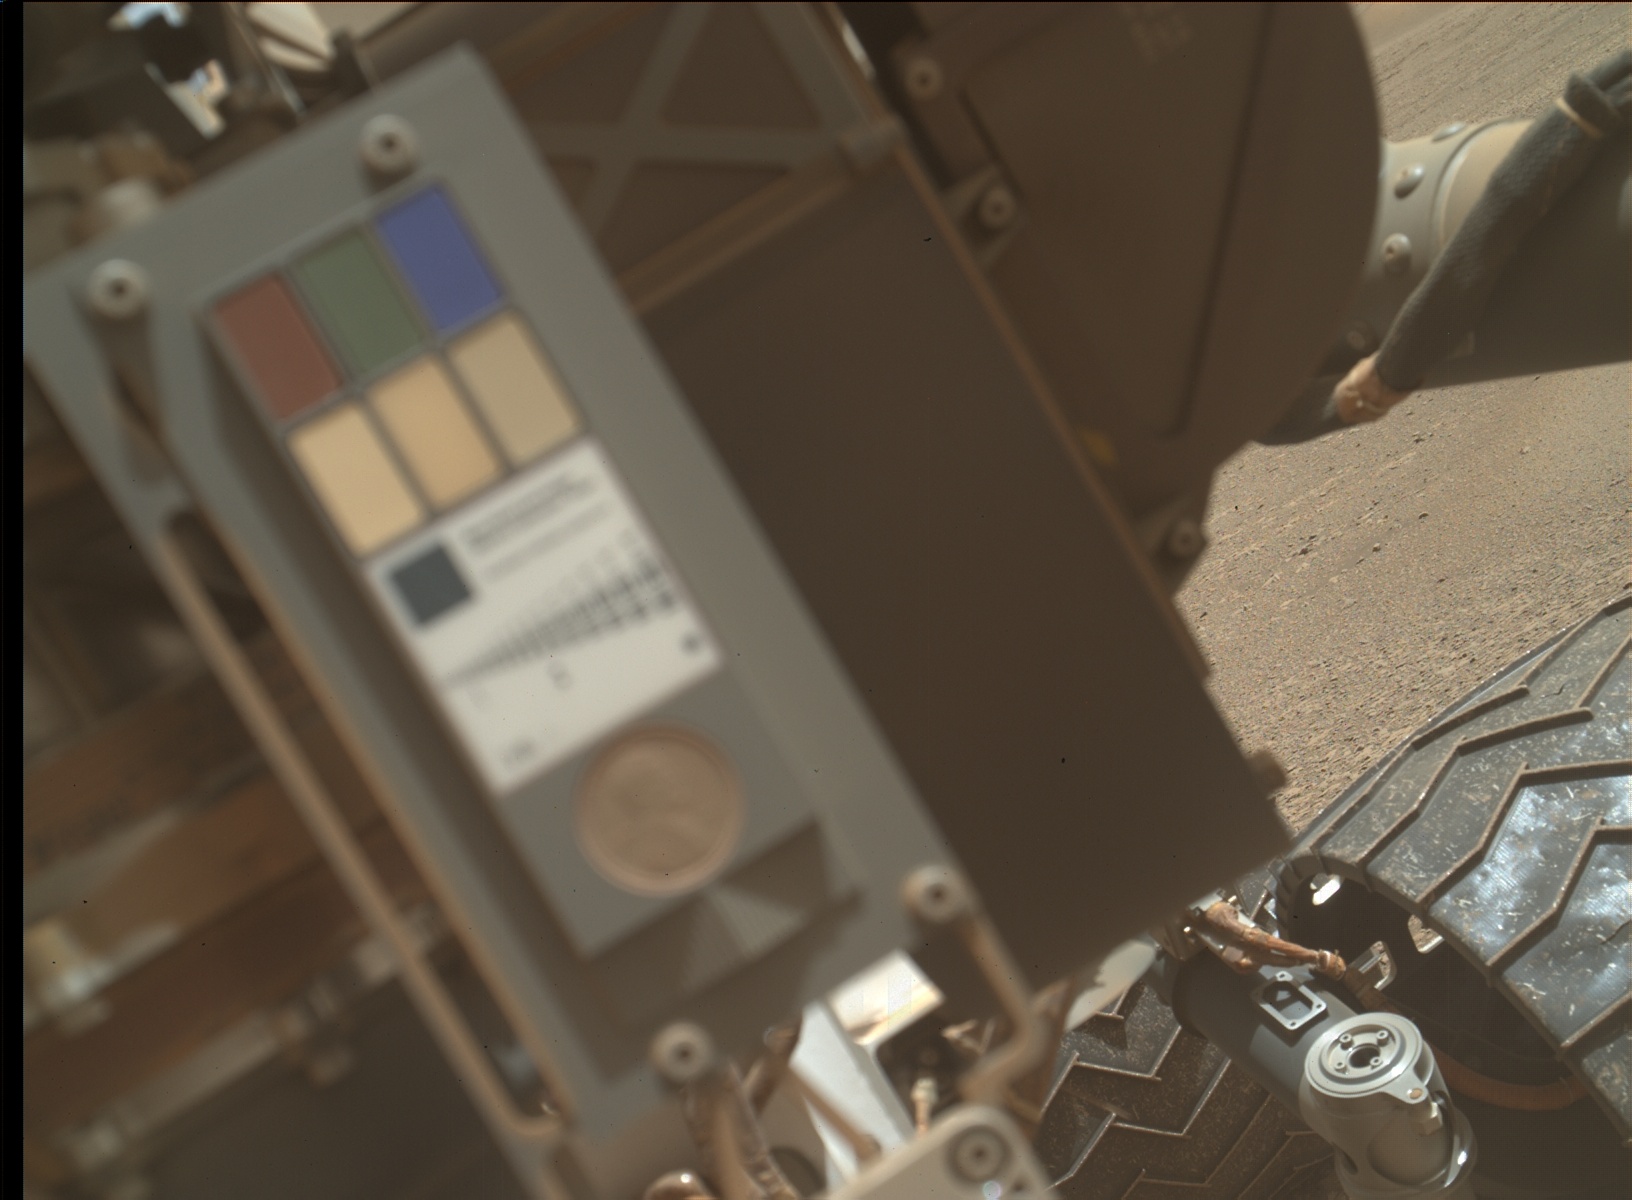 Nasa's Mars rover Curiosity acquired this image using its Mars Hand Lens Imager (MAHLI) on Sol 2432